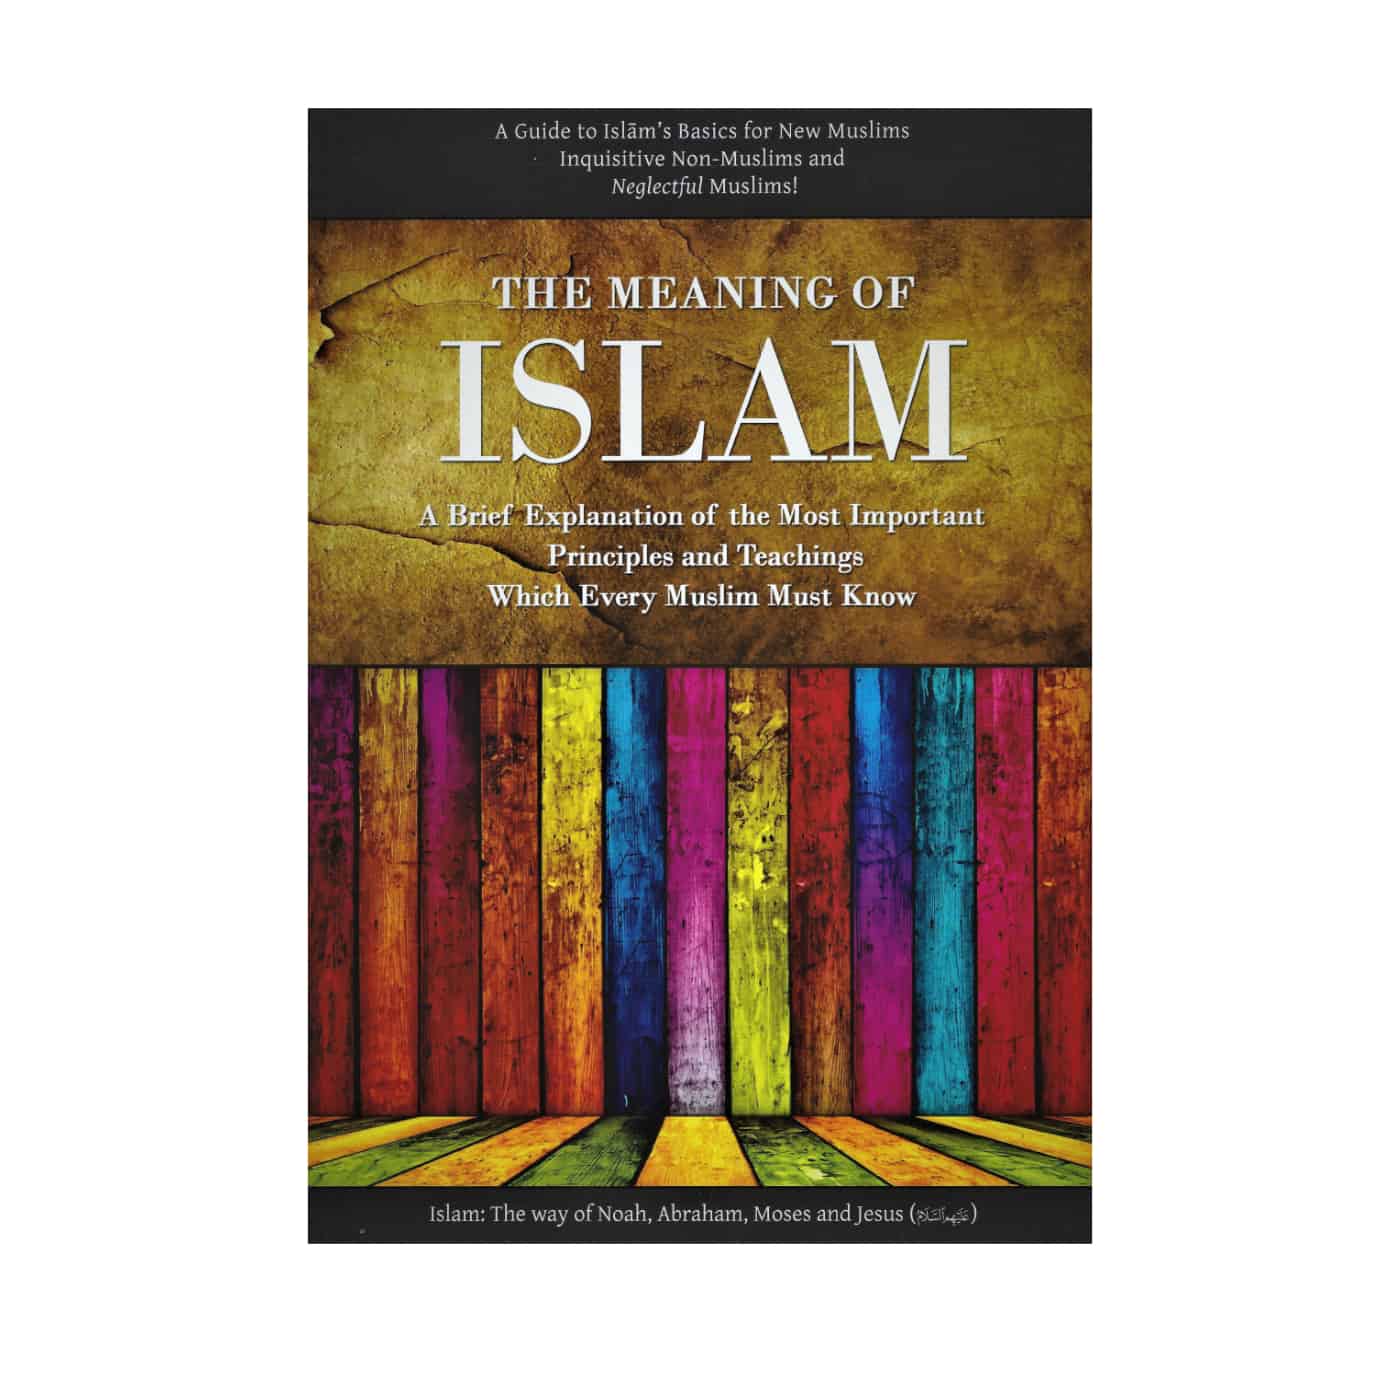 The Meaning of Islam - A Brief Explanation Of The Most Important Principles And Teachings